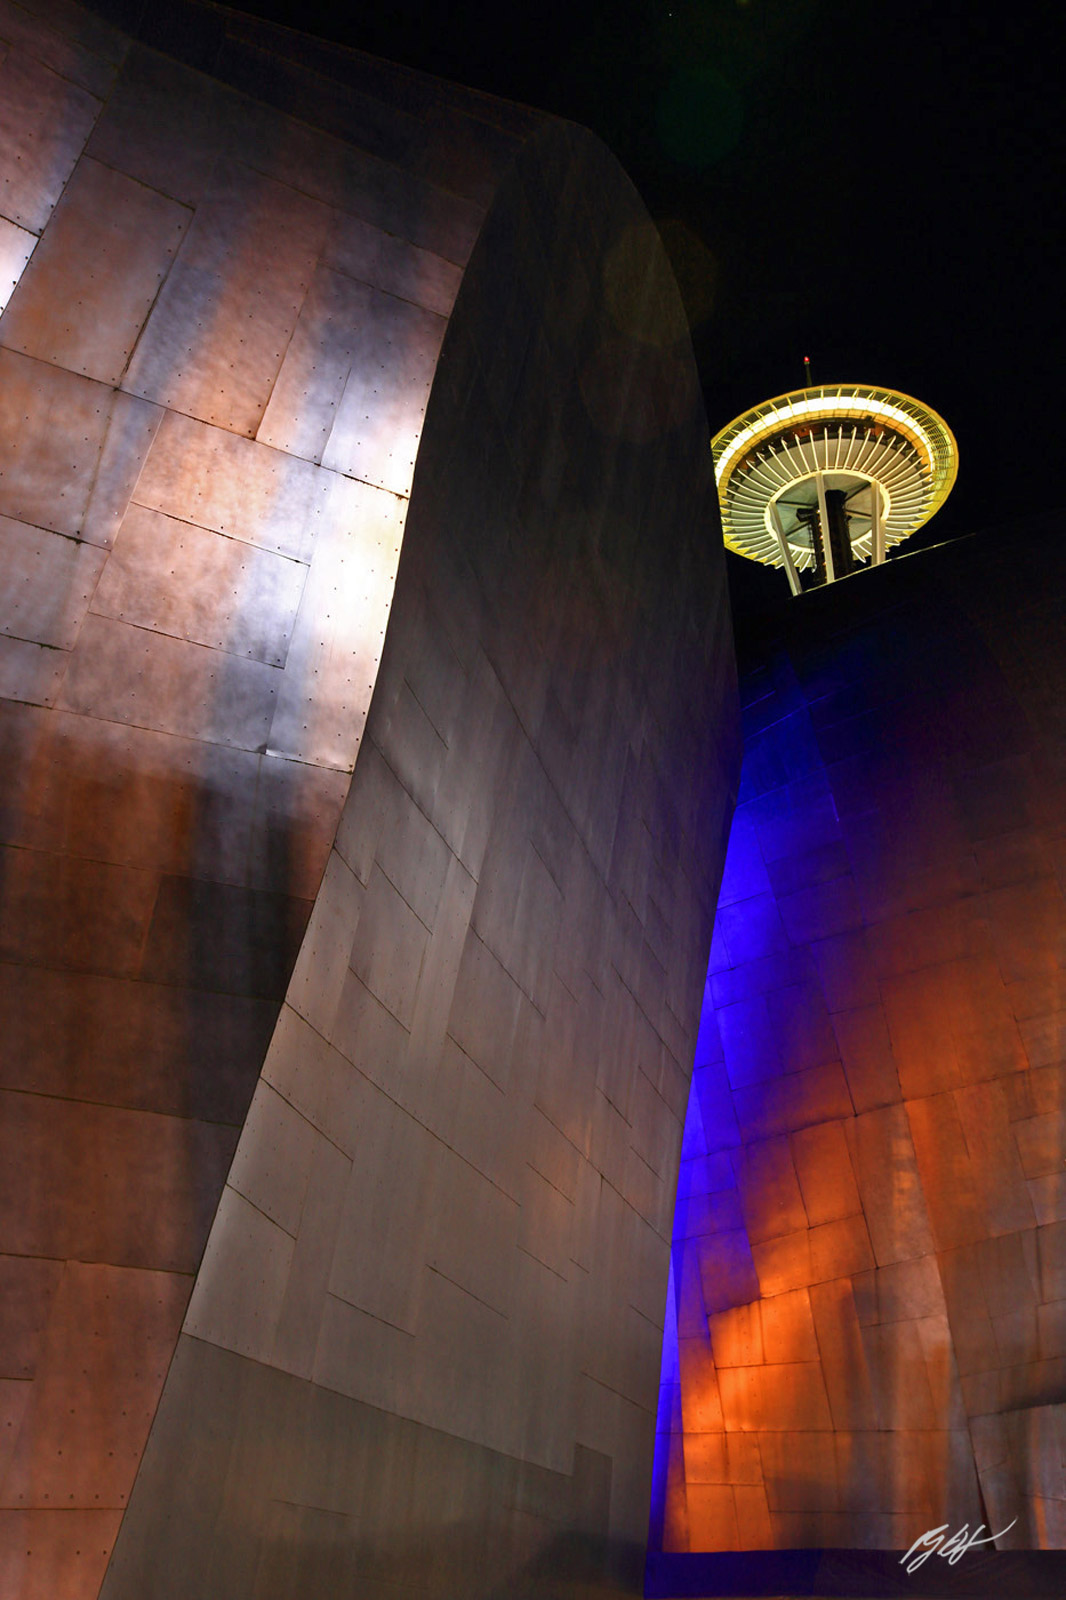 The Space Needle and the Experience Music Project in Seattle Center in Seattle Washington